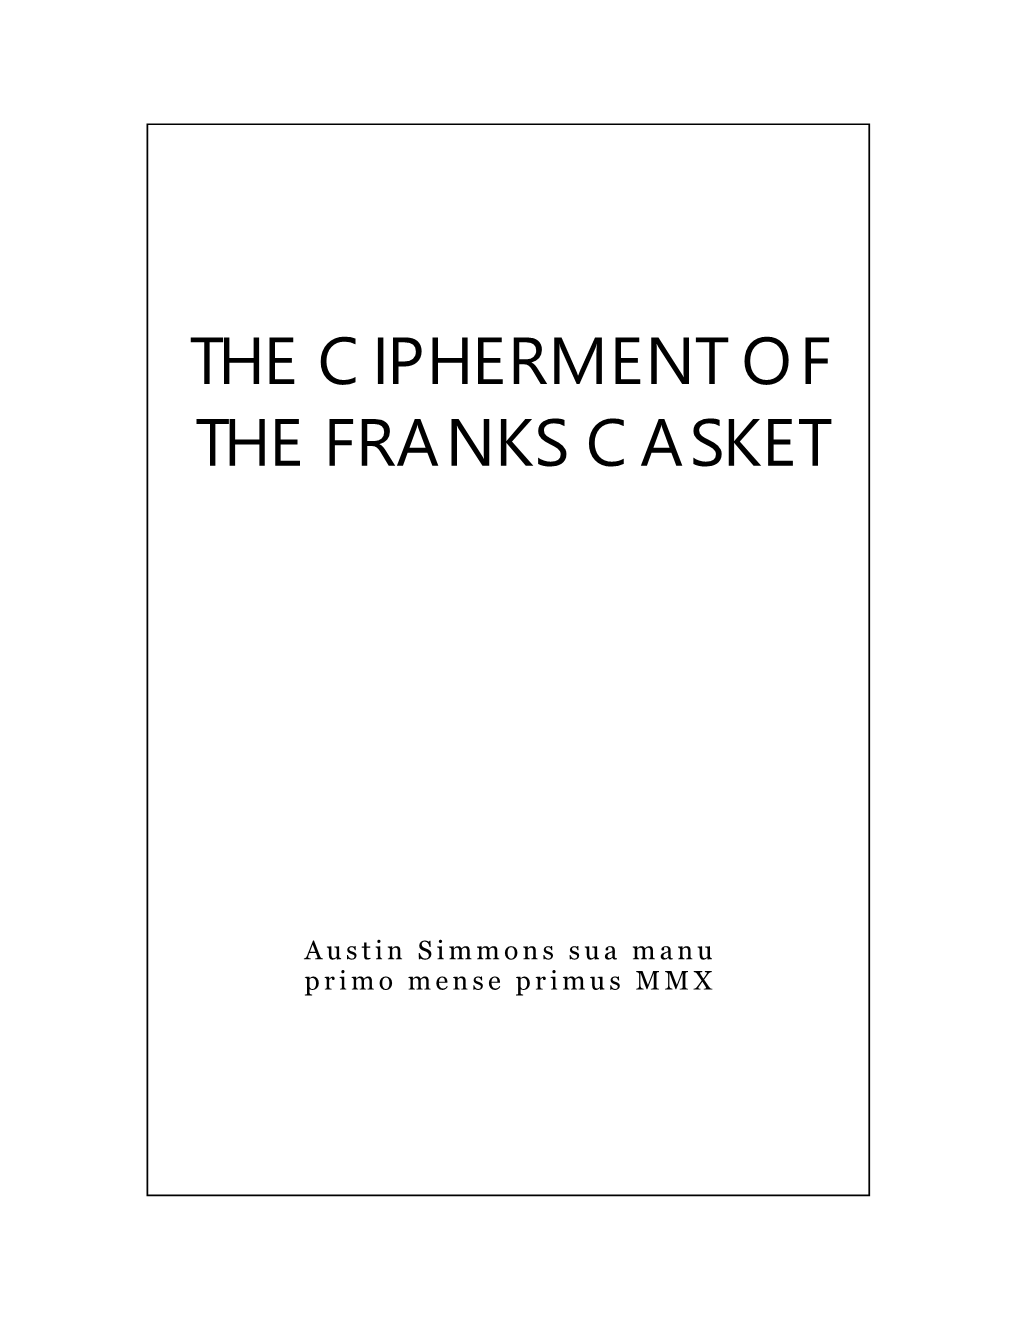 The Cipherment of the Franks Casket